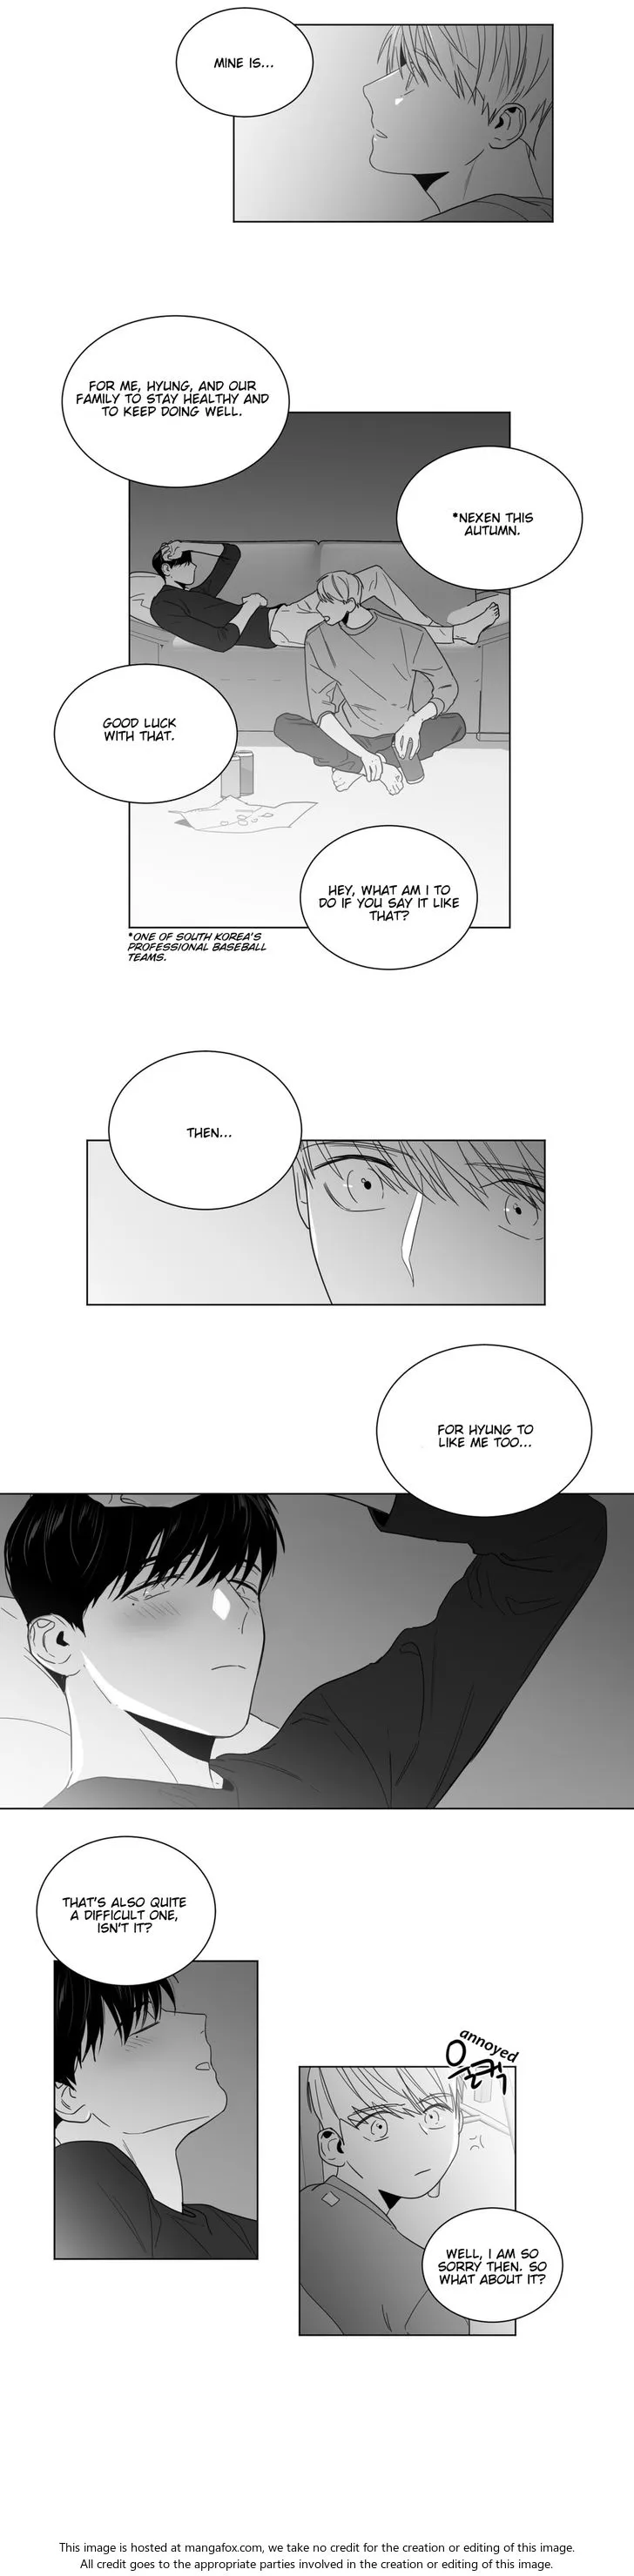 Lover Boy (Lezhin) Chapter 019 page 4